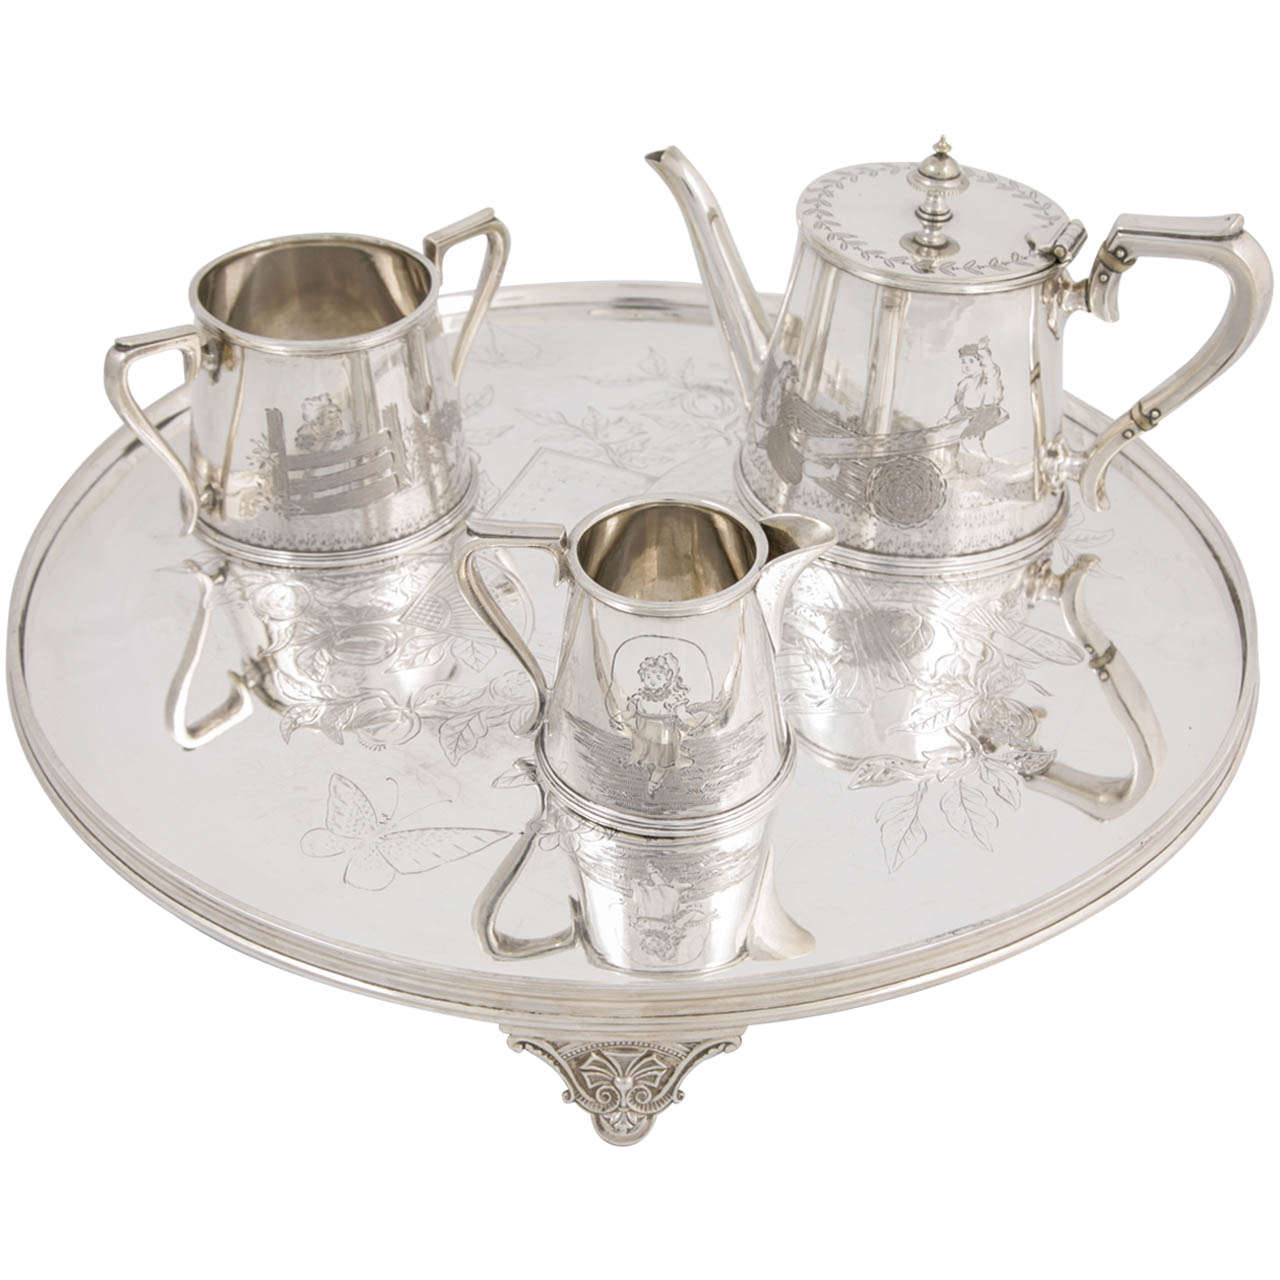 Three-Piece Child's Tea Set and Tray For Sale